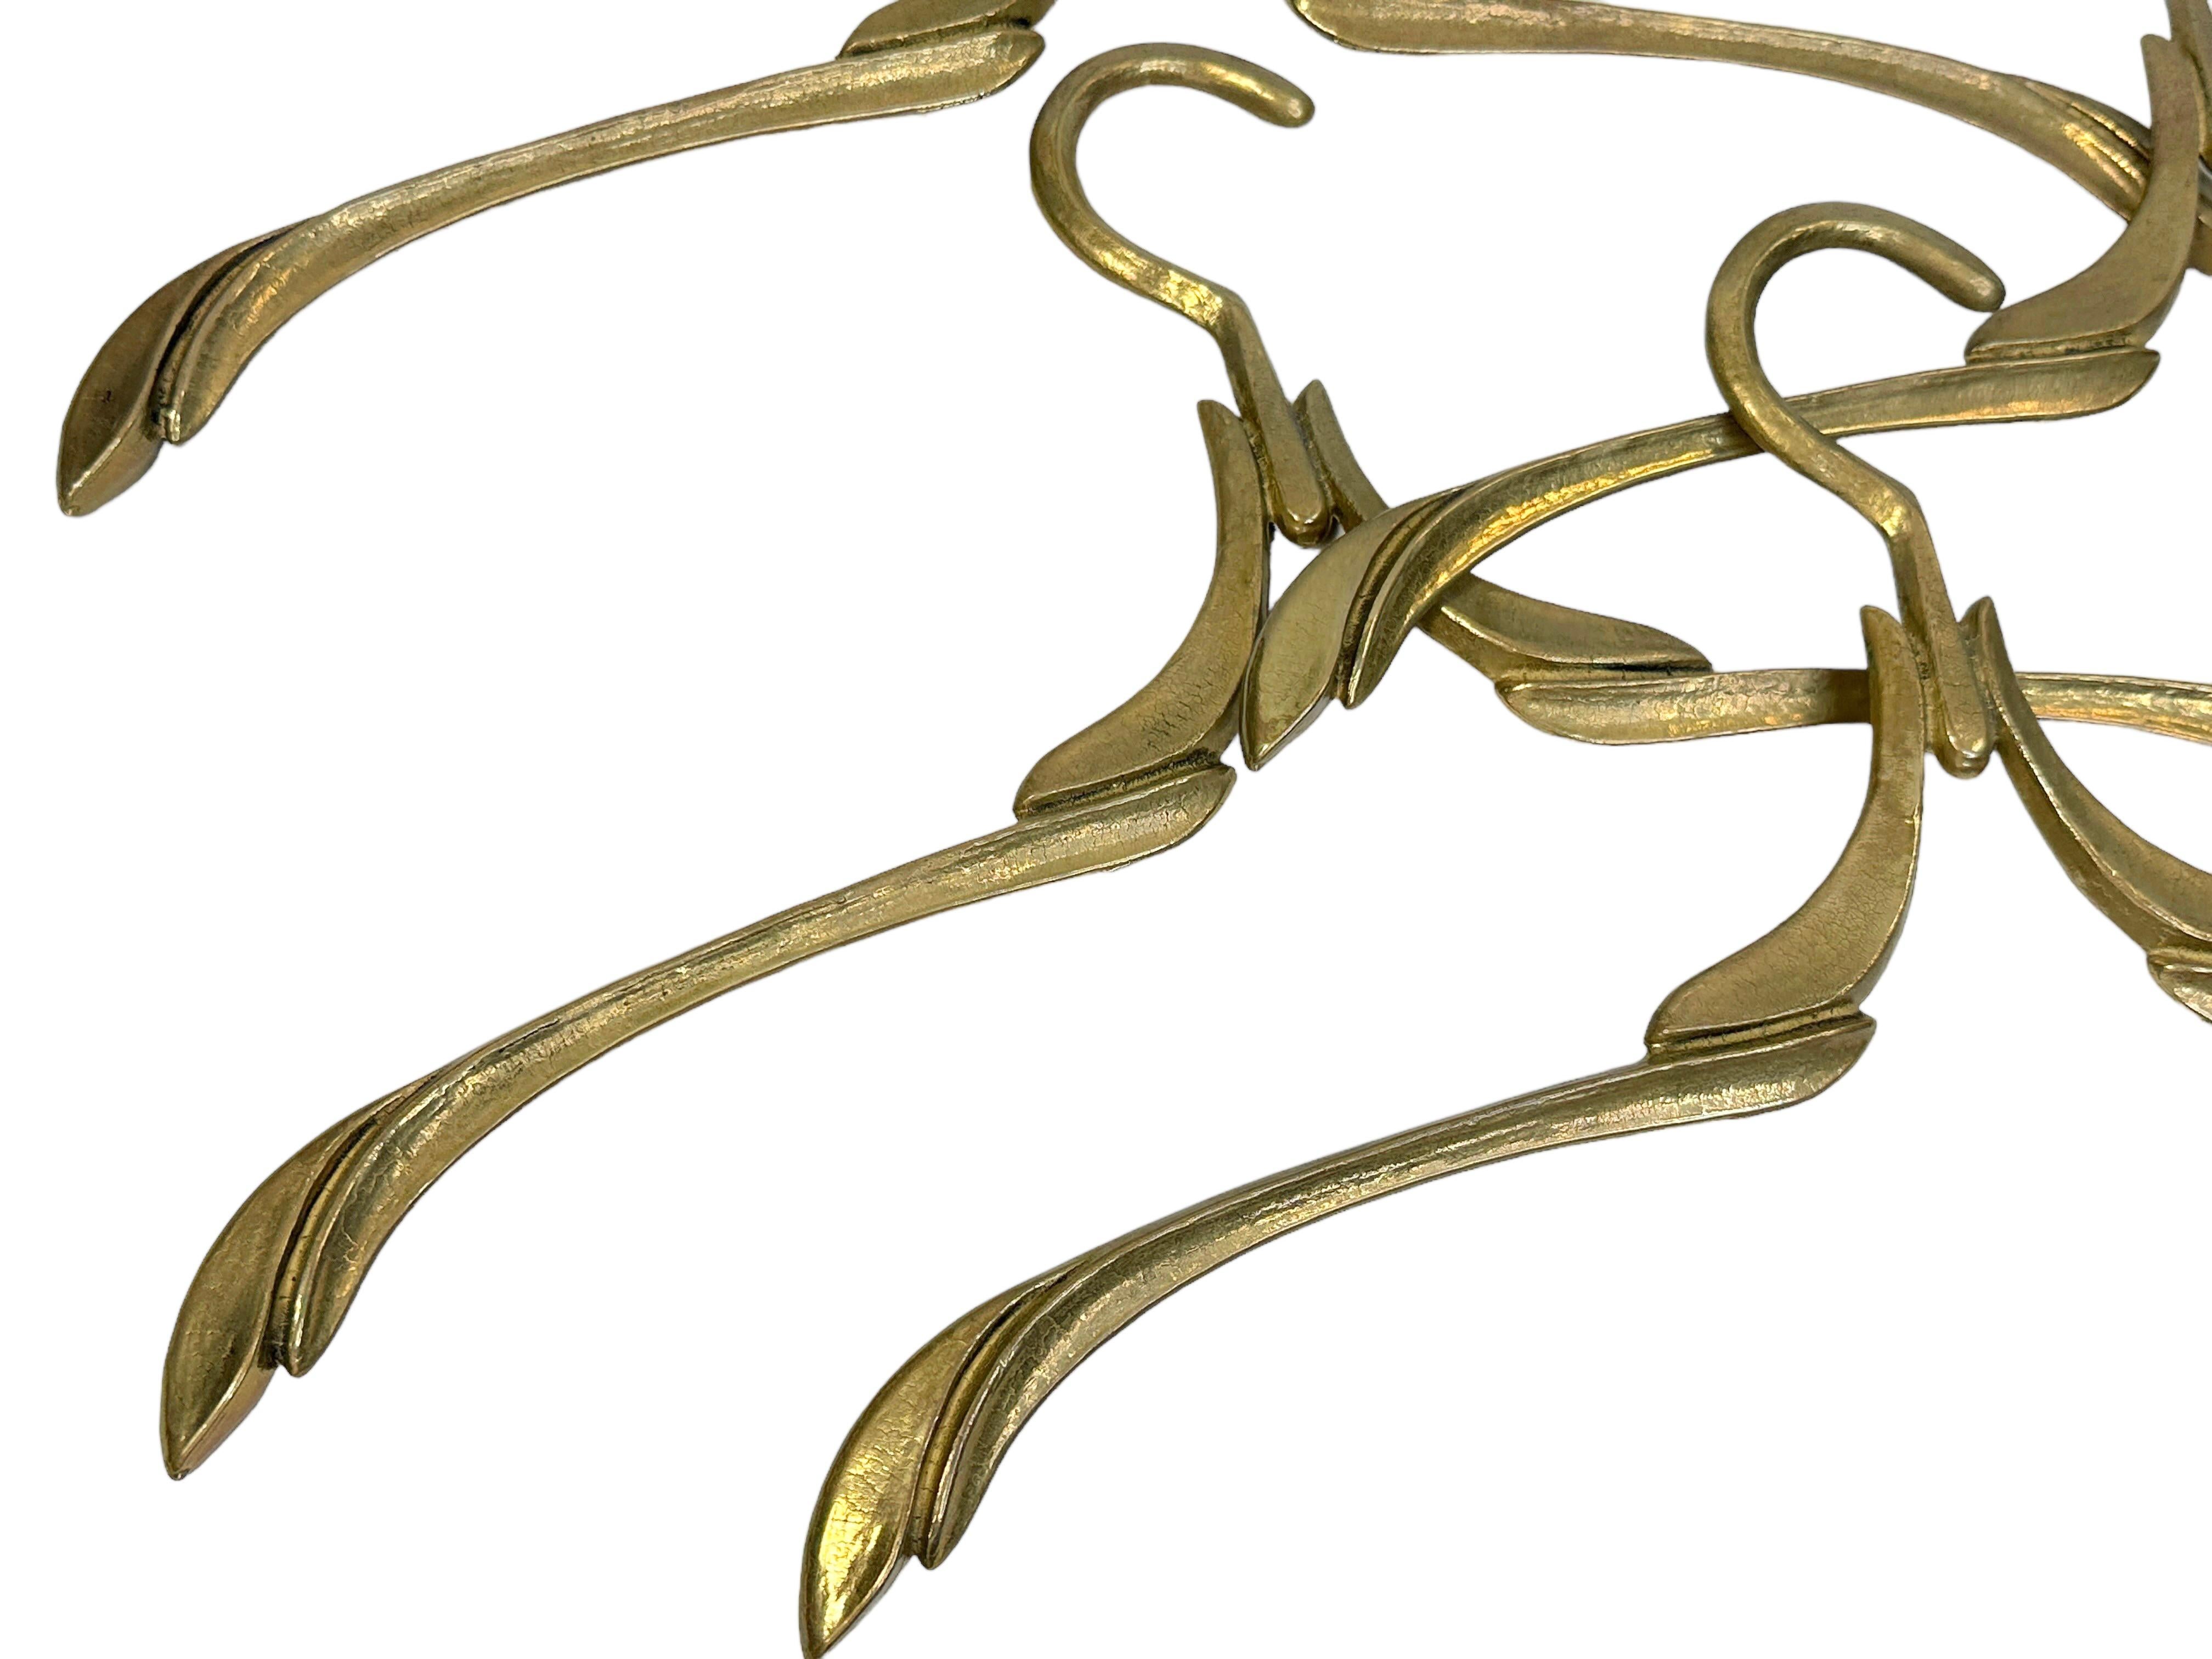 Mid-Century Modern Set of Four Coat Hangers, Art Nouveau Style Solid Brass, Vintage 1950s to 1960s  For Sale